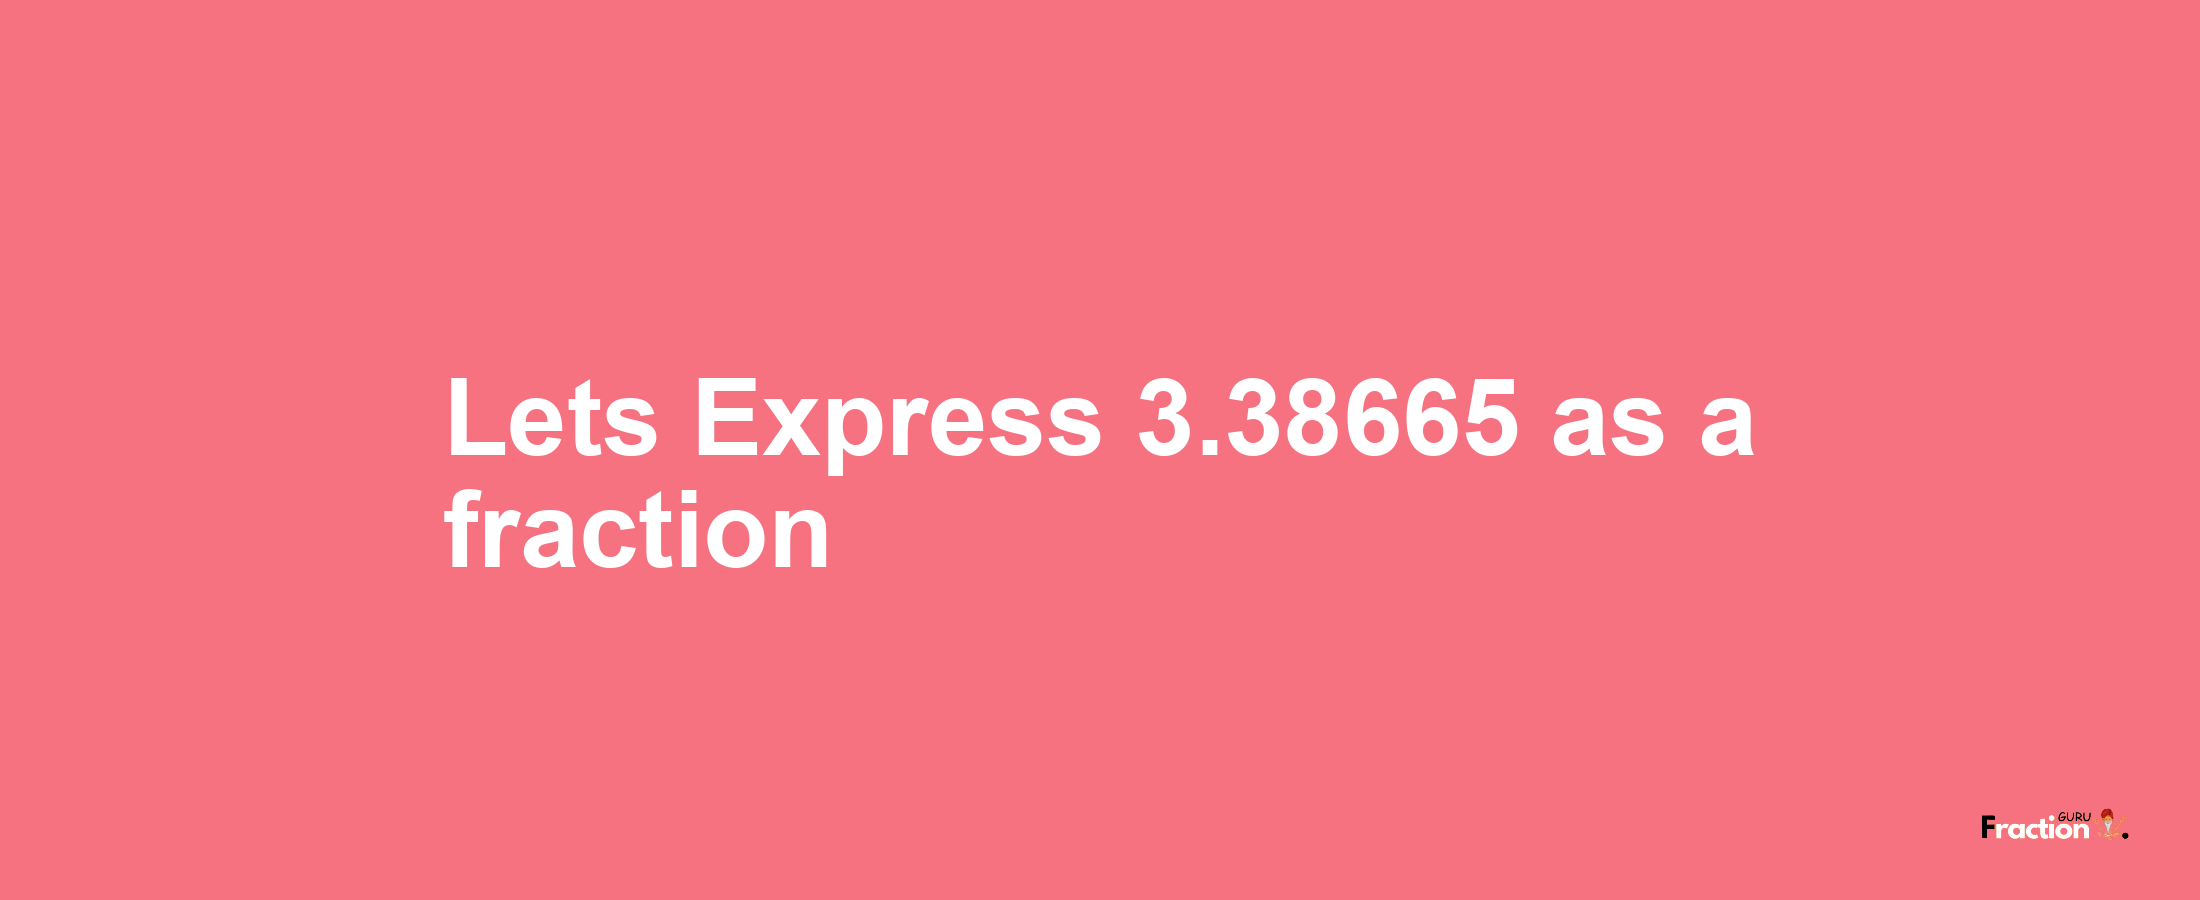 Lets Express 3.38665 as afraction